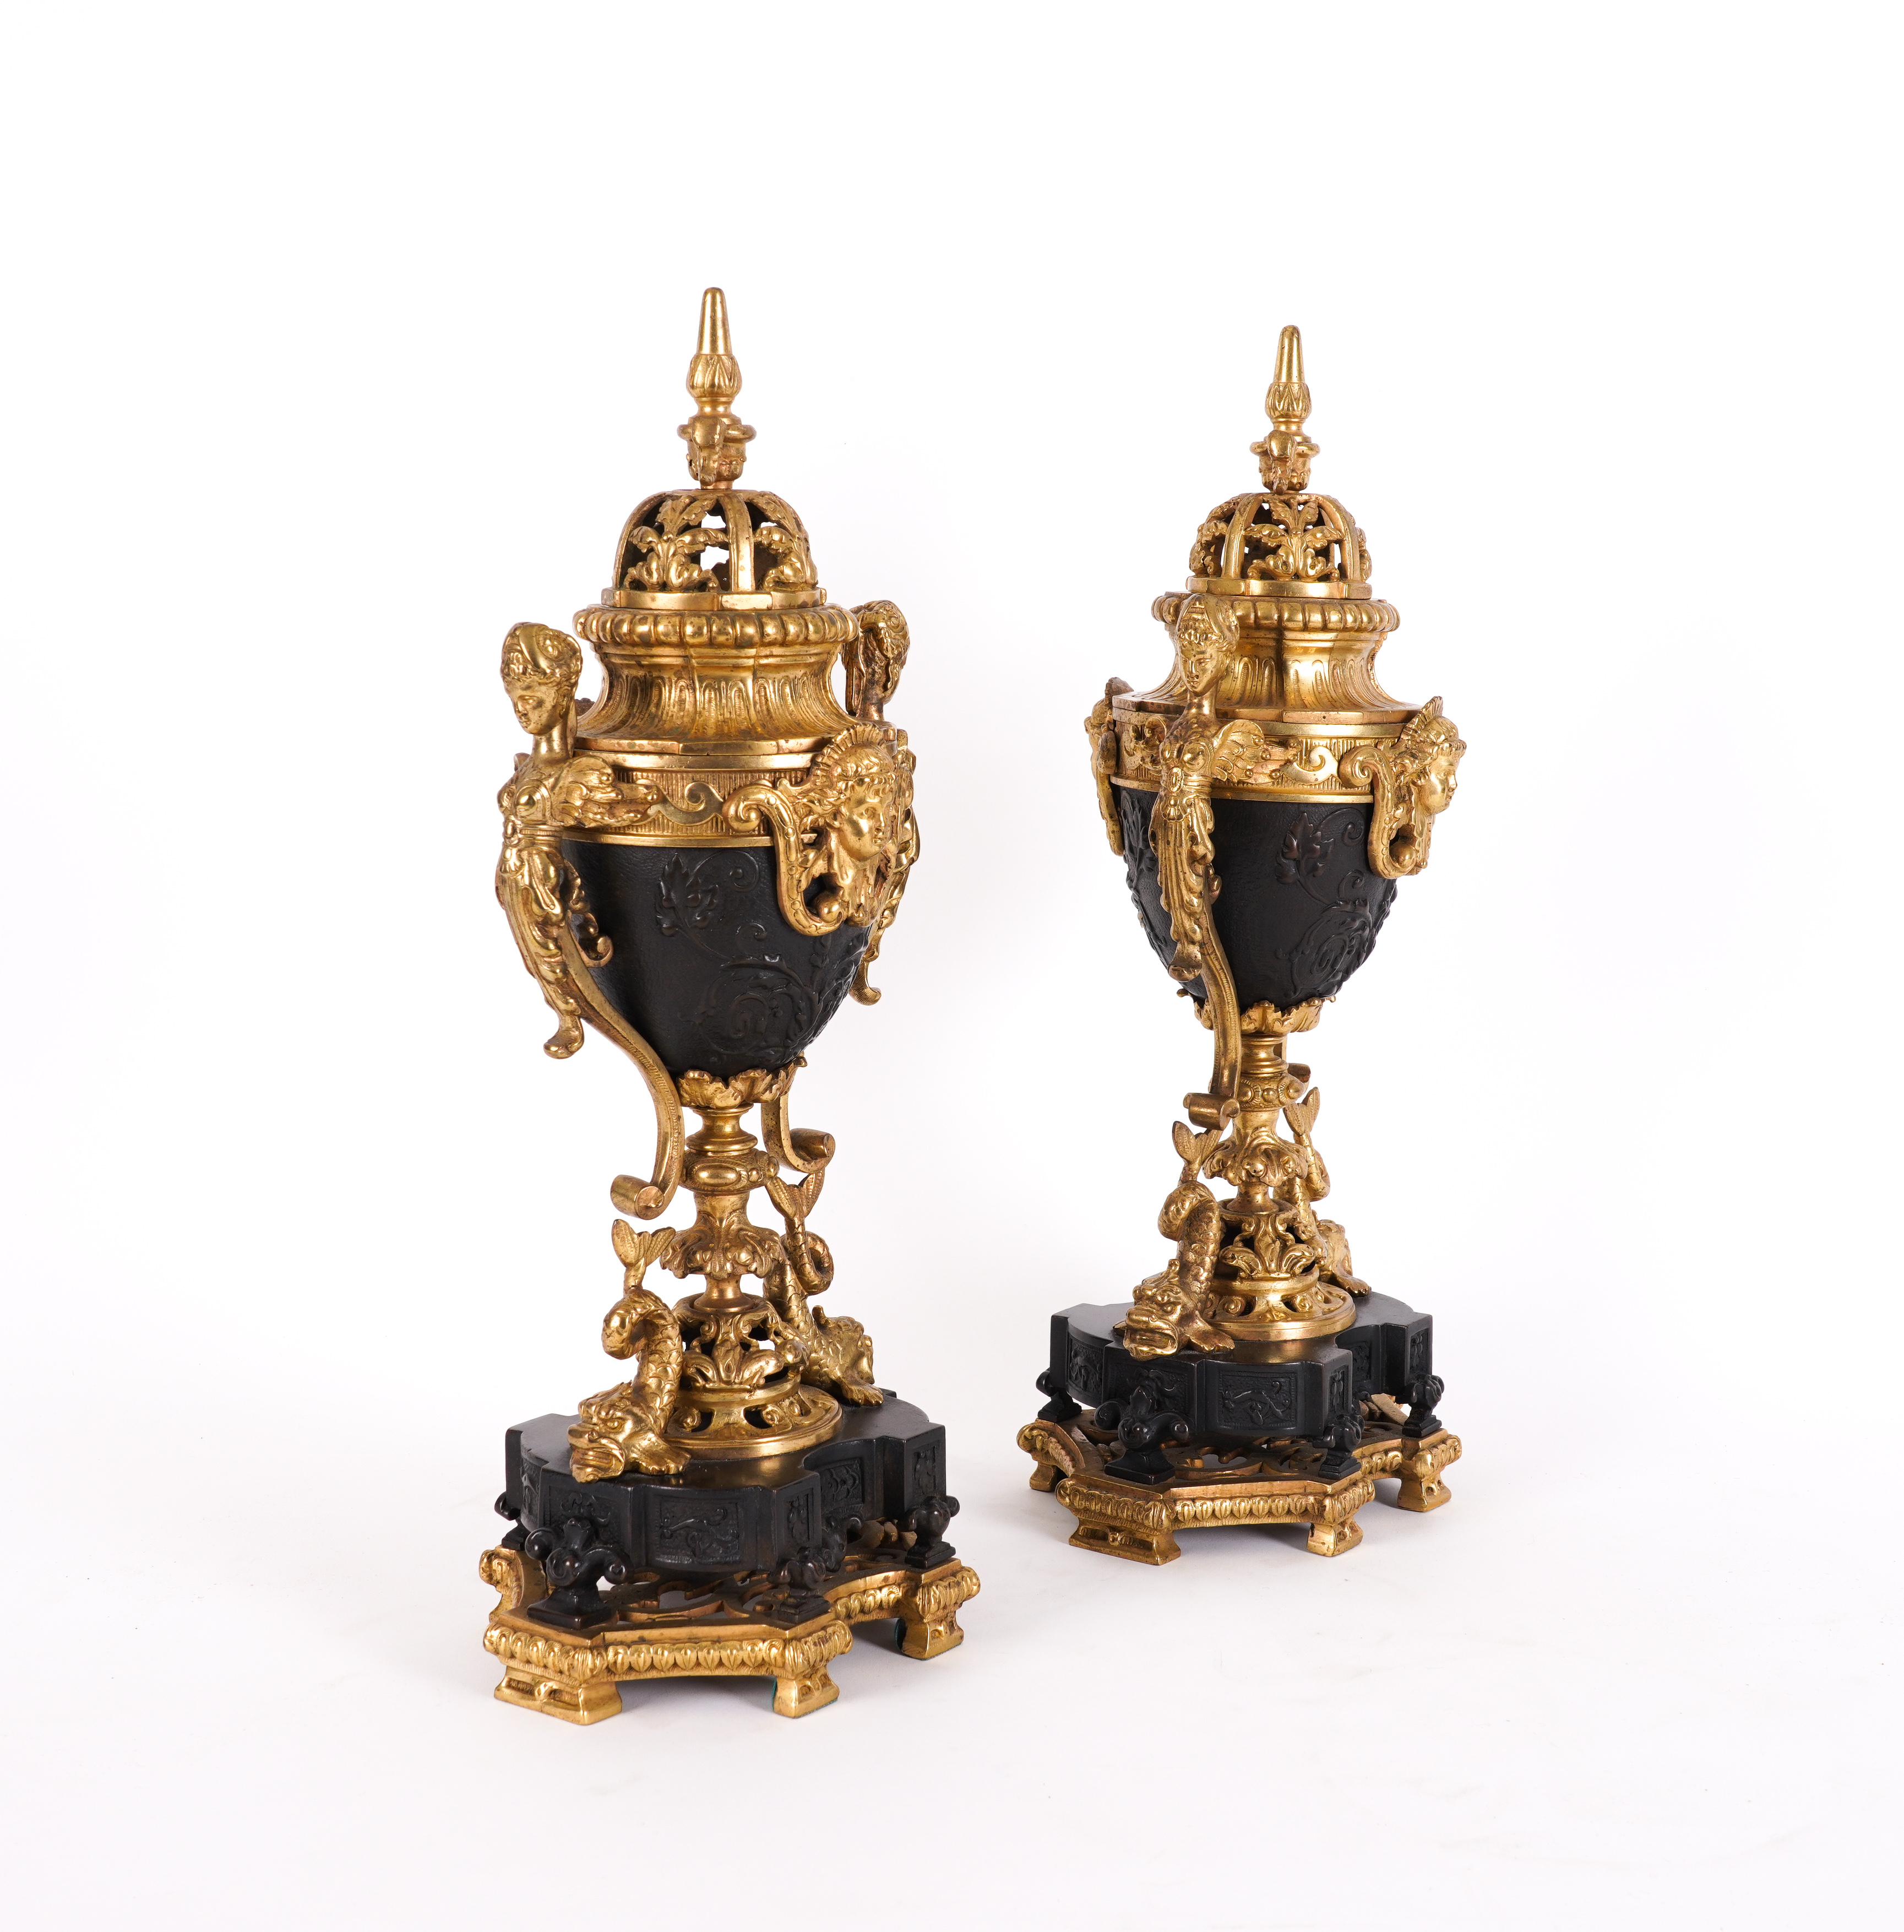 A PAIR OF REGENCE STYLE GILT AND PATINATED METAL ORNAMENTAL URNS OR PERFUME BURNERS (2)